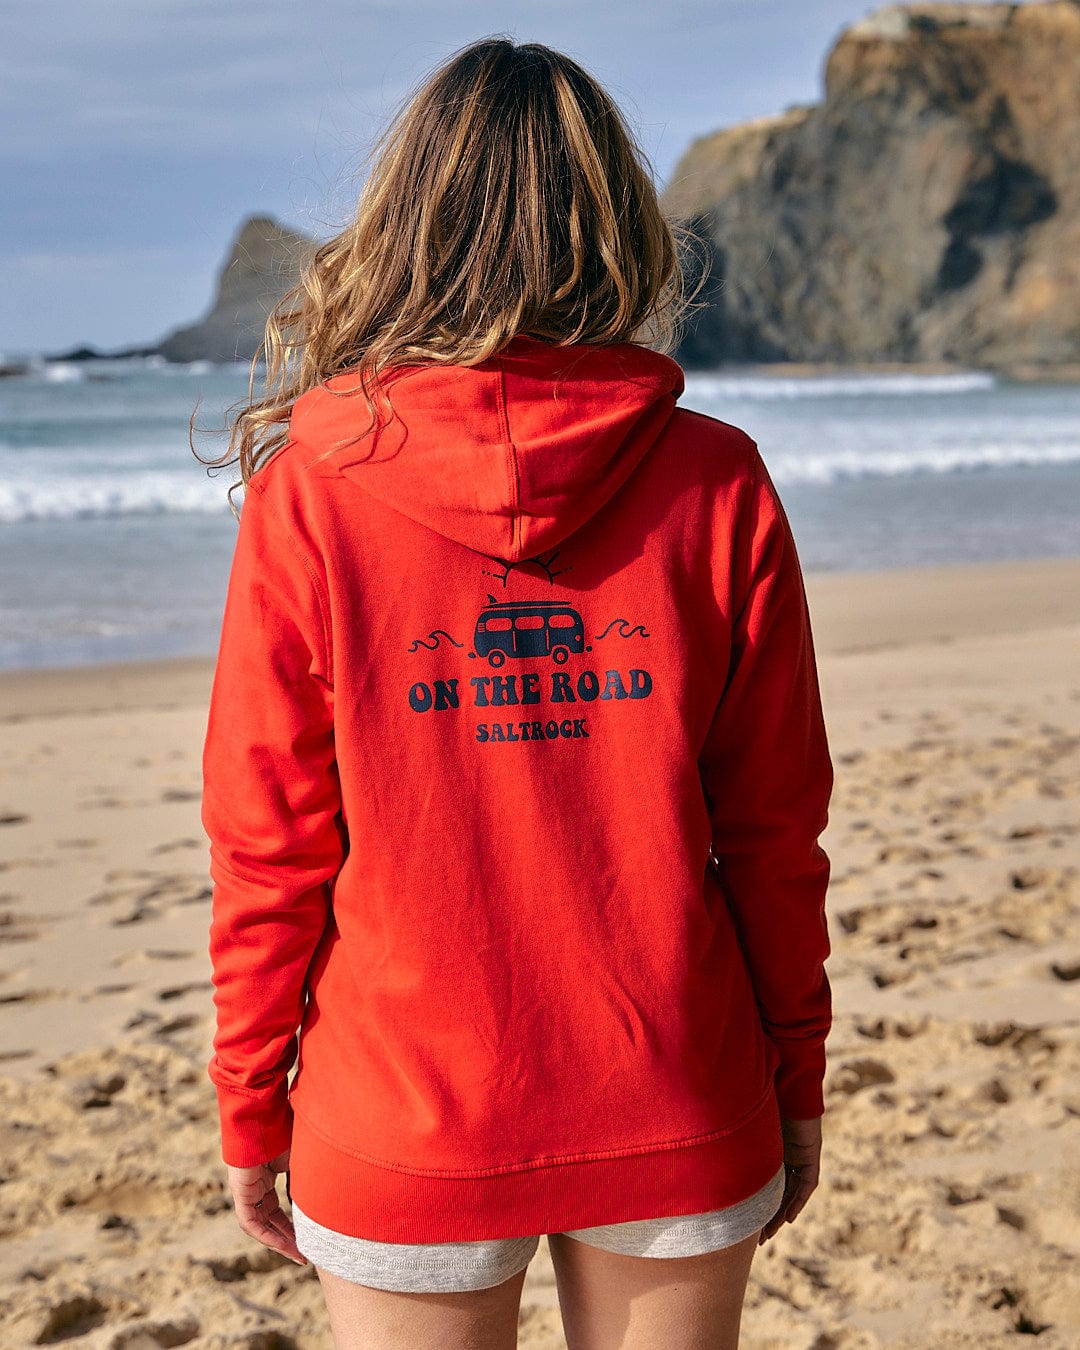 The back of a woman wearing a Saltrock On The Road - Womens Zip Hoodie - Red on the beach.